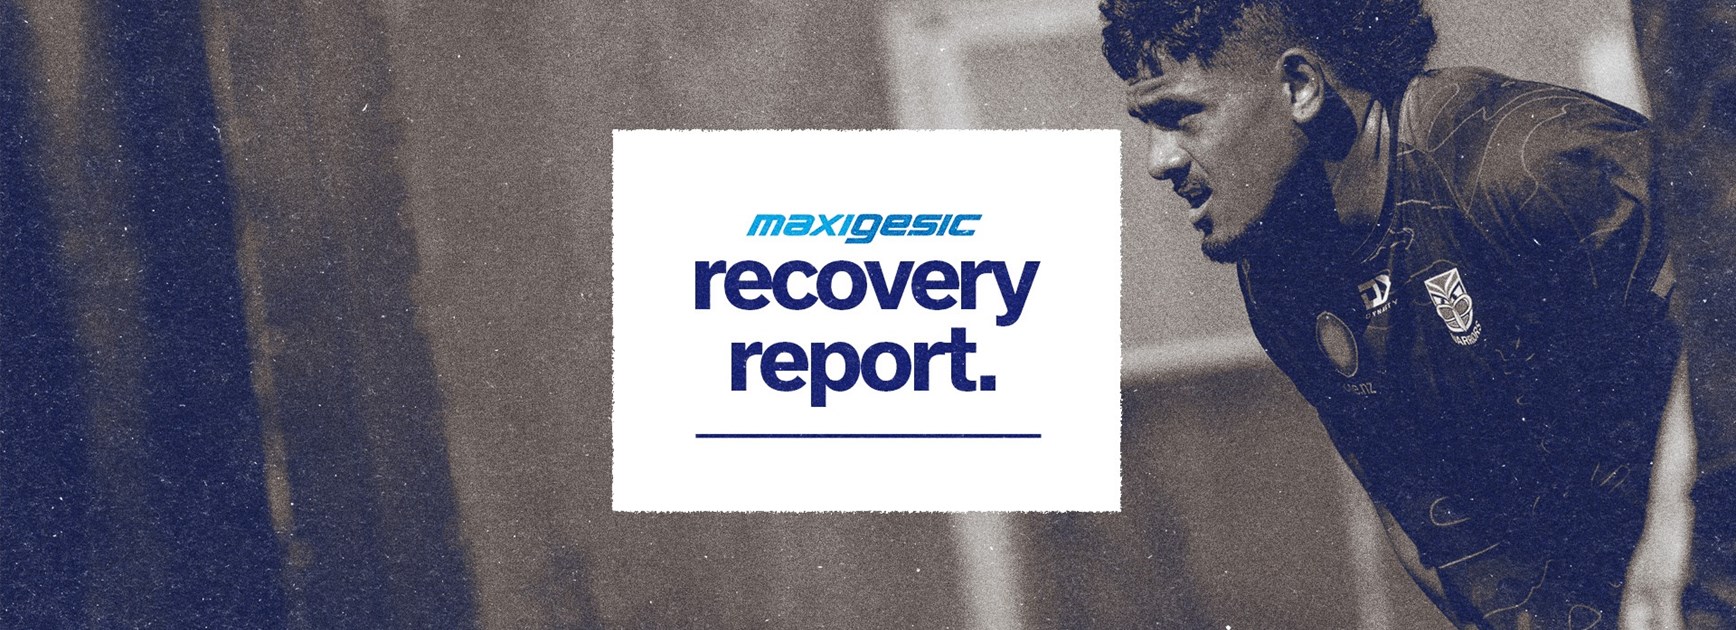 Maxigesic Recovery Report: Big names cleared